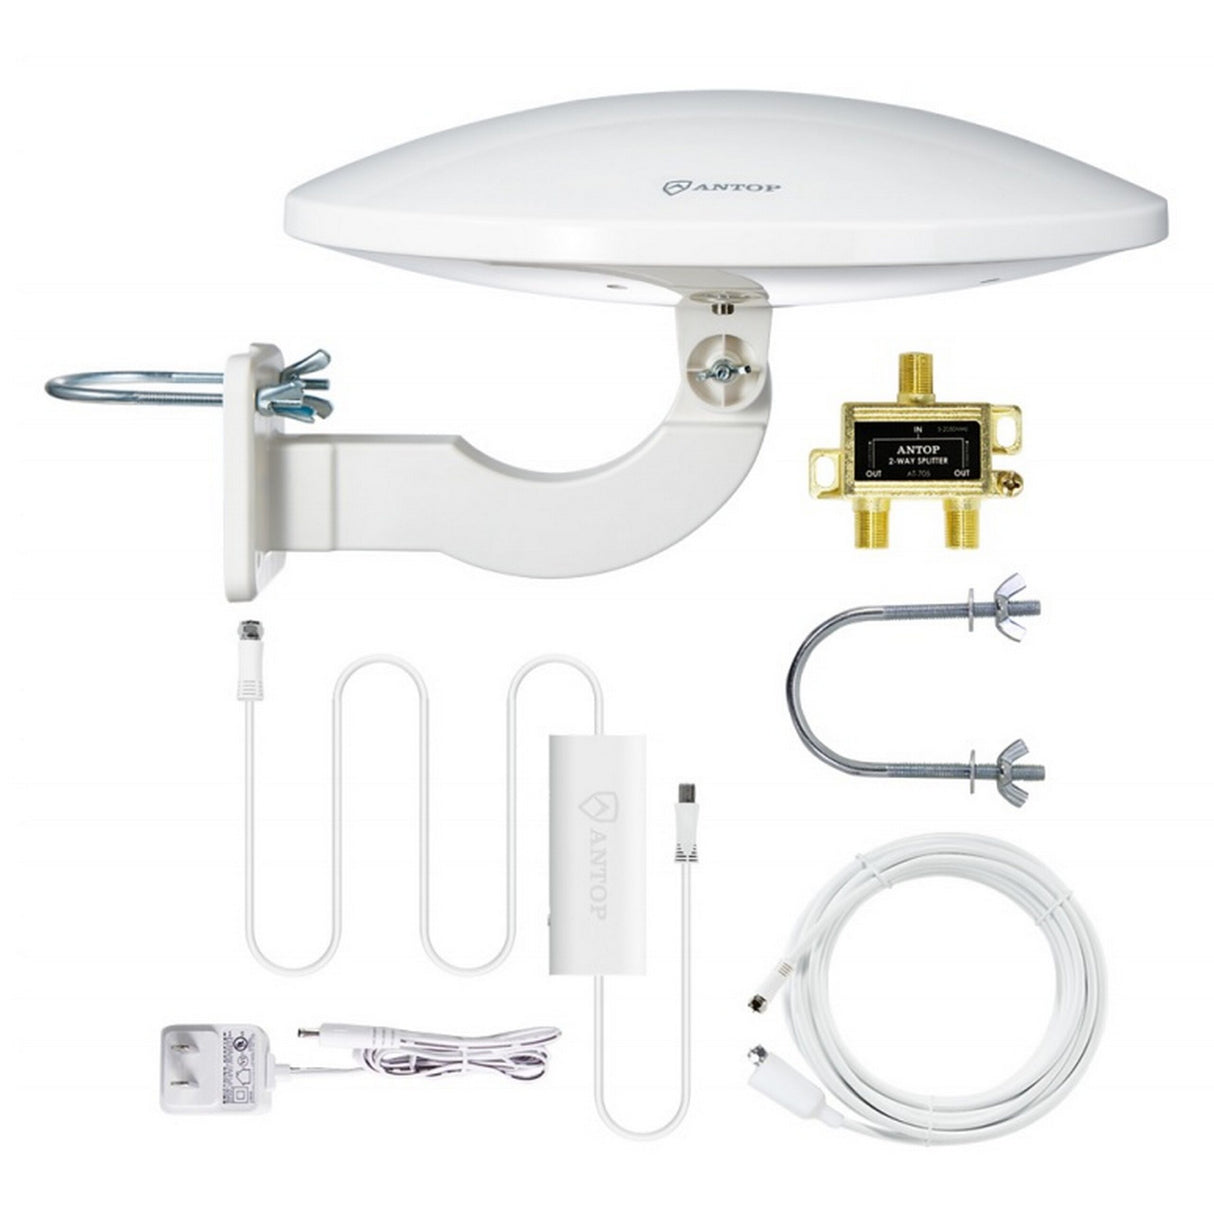 ANTOP AT-414BC5 Outdoor UFO HDTV Antenna with Smartpass Amplifier